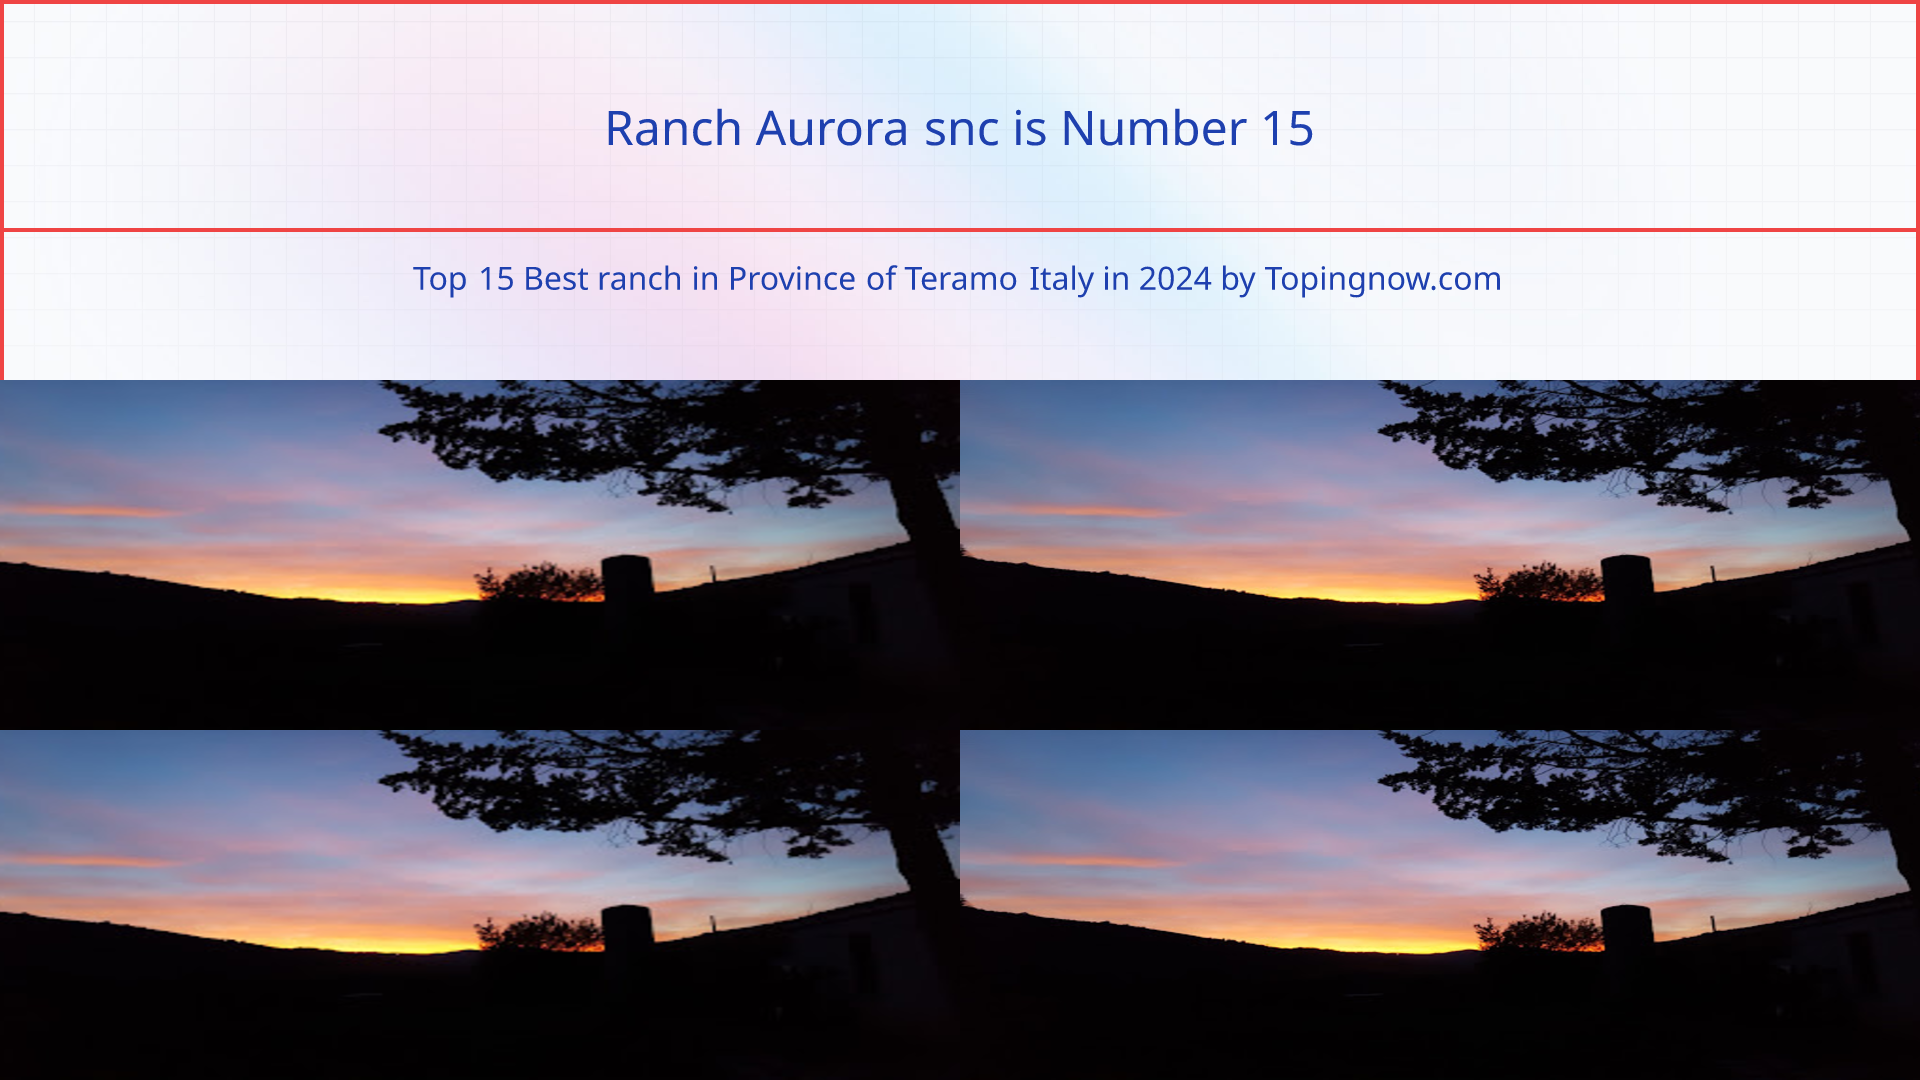 Ranch Aurora snc: Top 15 Best ranch in Province of Teramo Italy in 2024